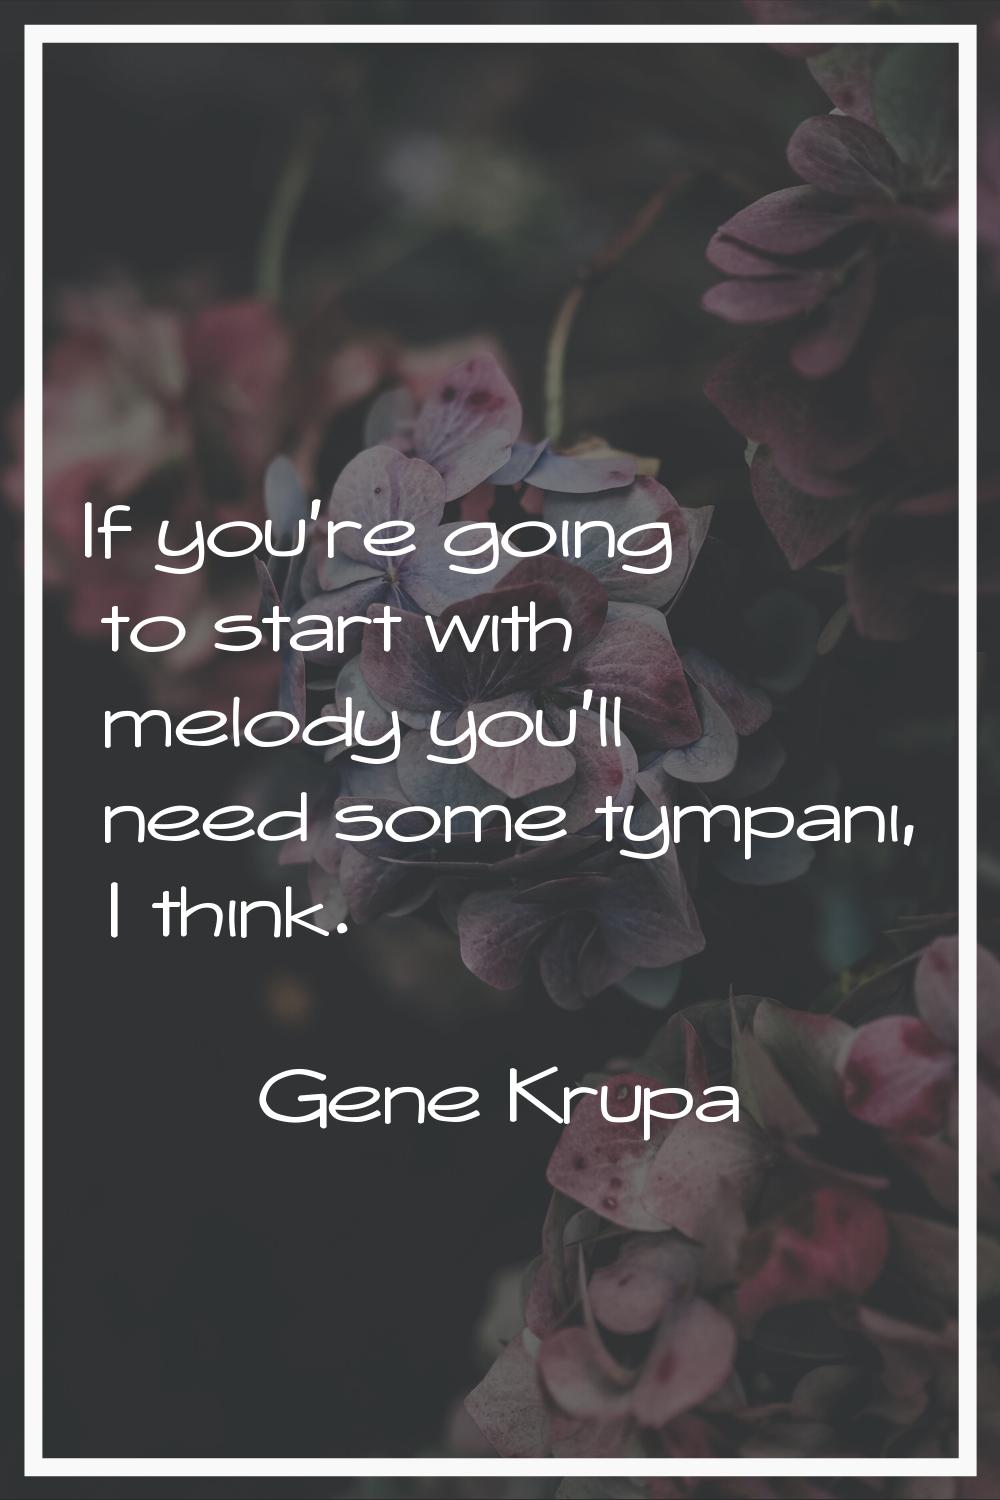 If you're going to start with melody you'll need some tympani, I think.